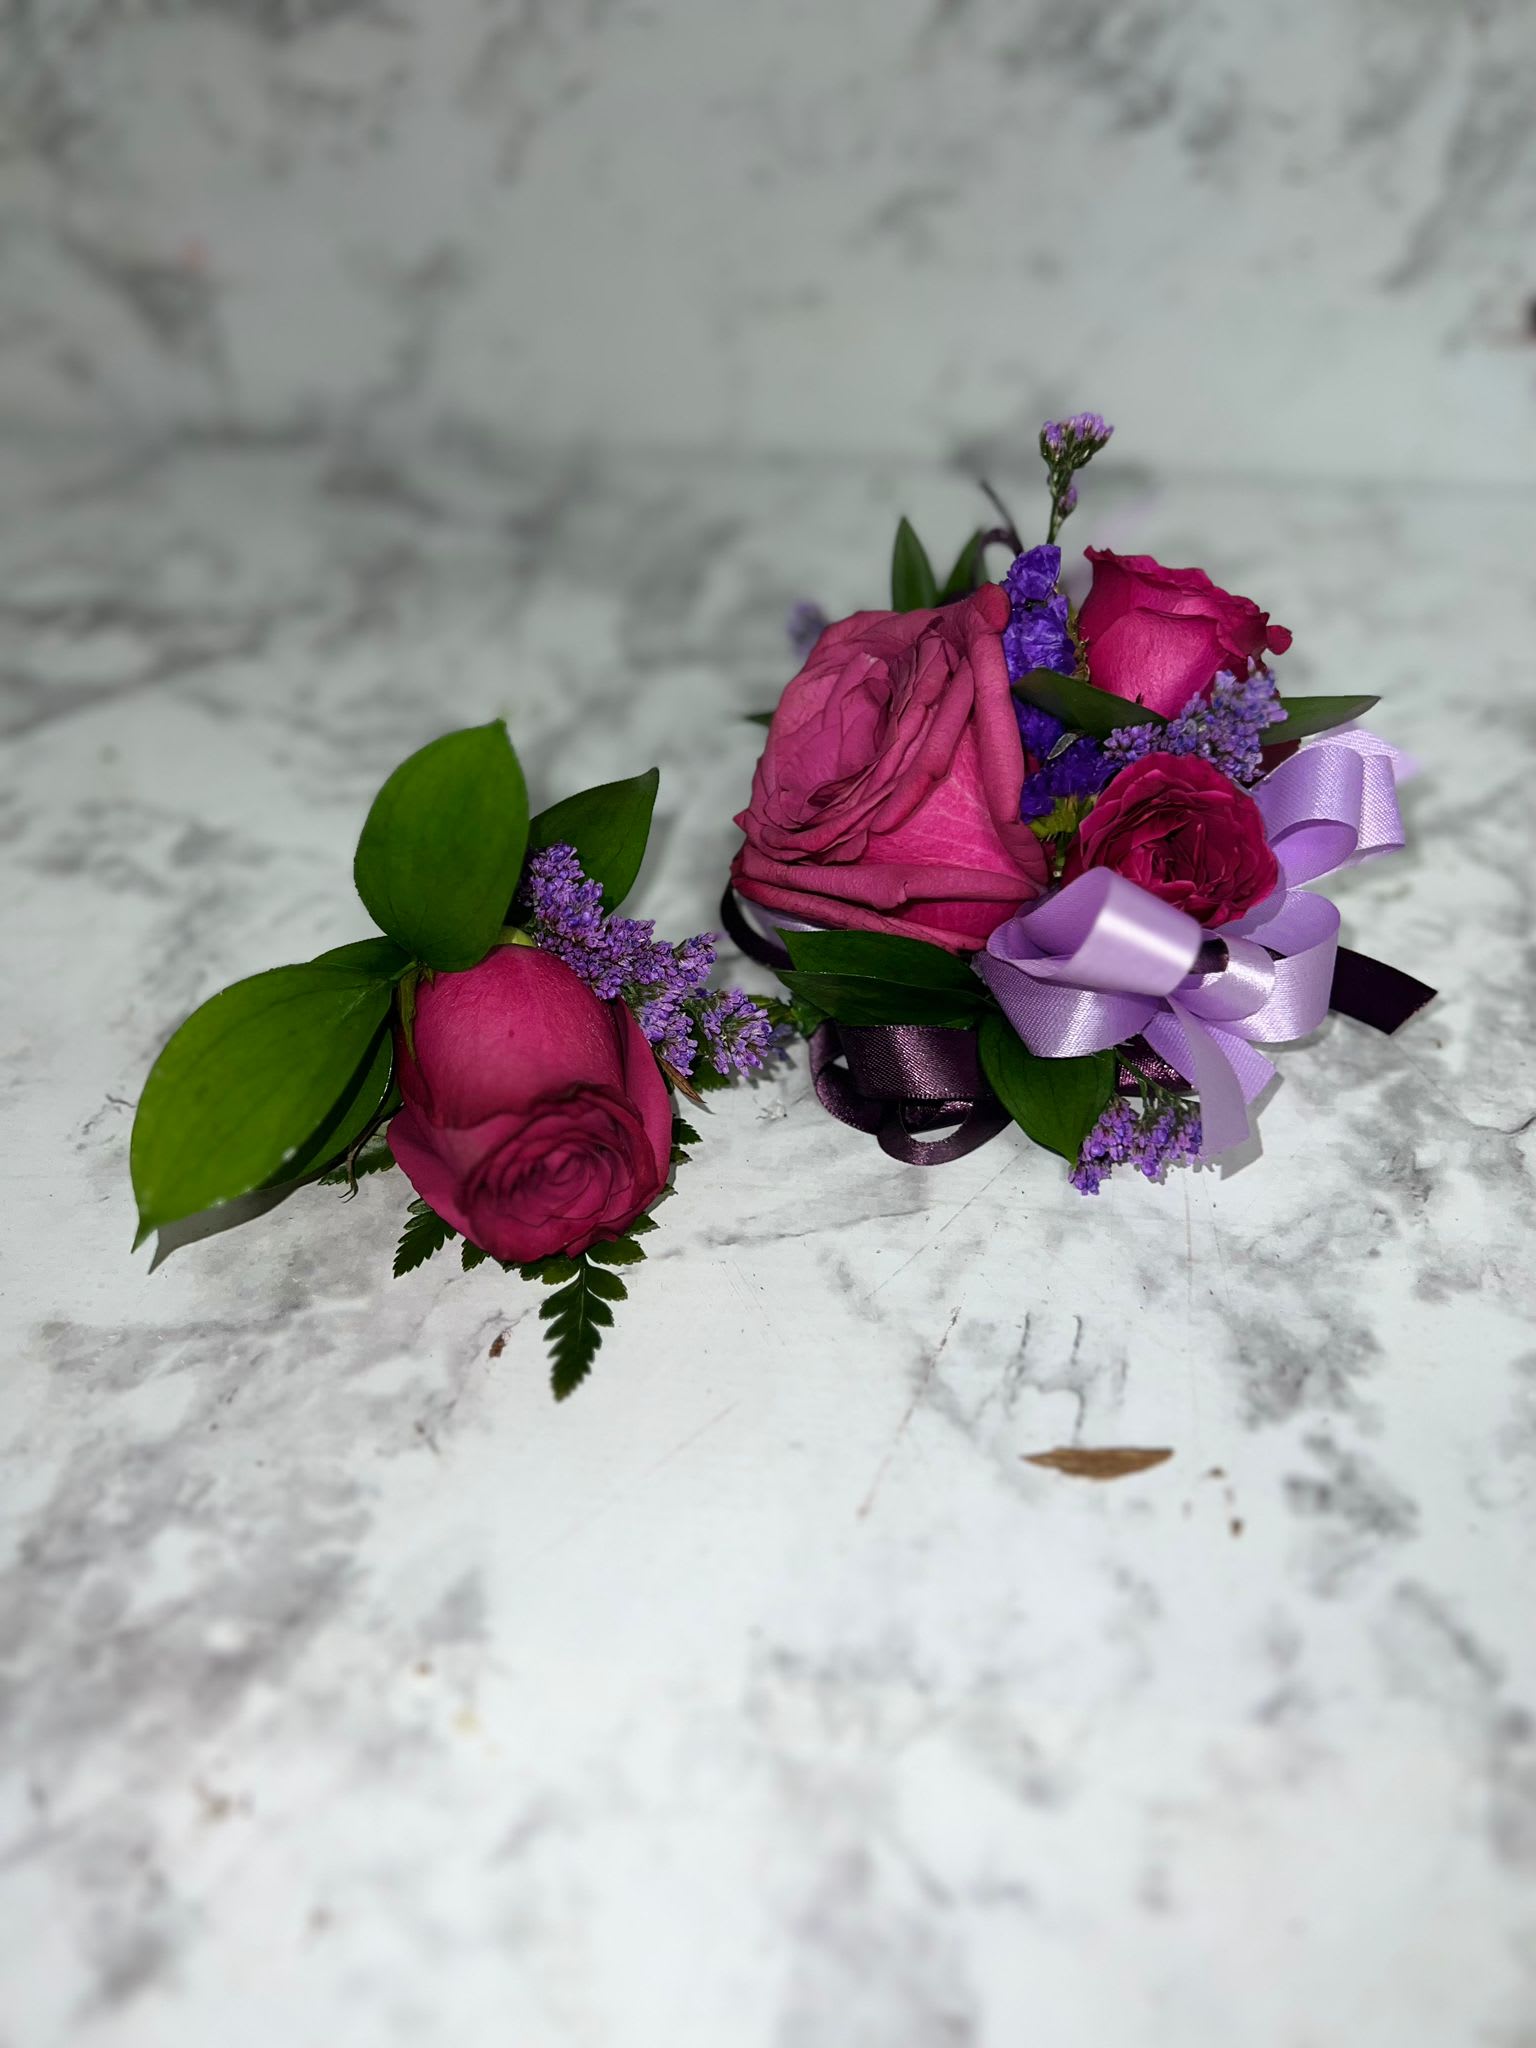 Corsage and Boutonier - This couple cannot be missing at your Prom or at your wedding. Designed with the best selection of Flowers. You must contact our customer service team